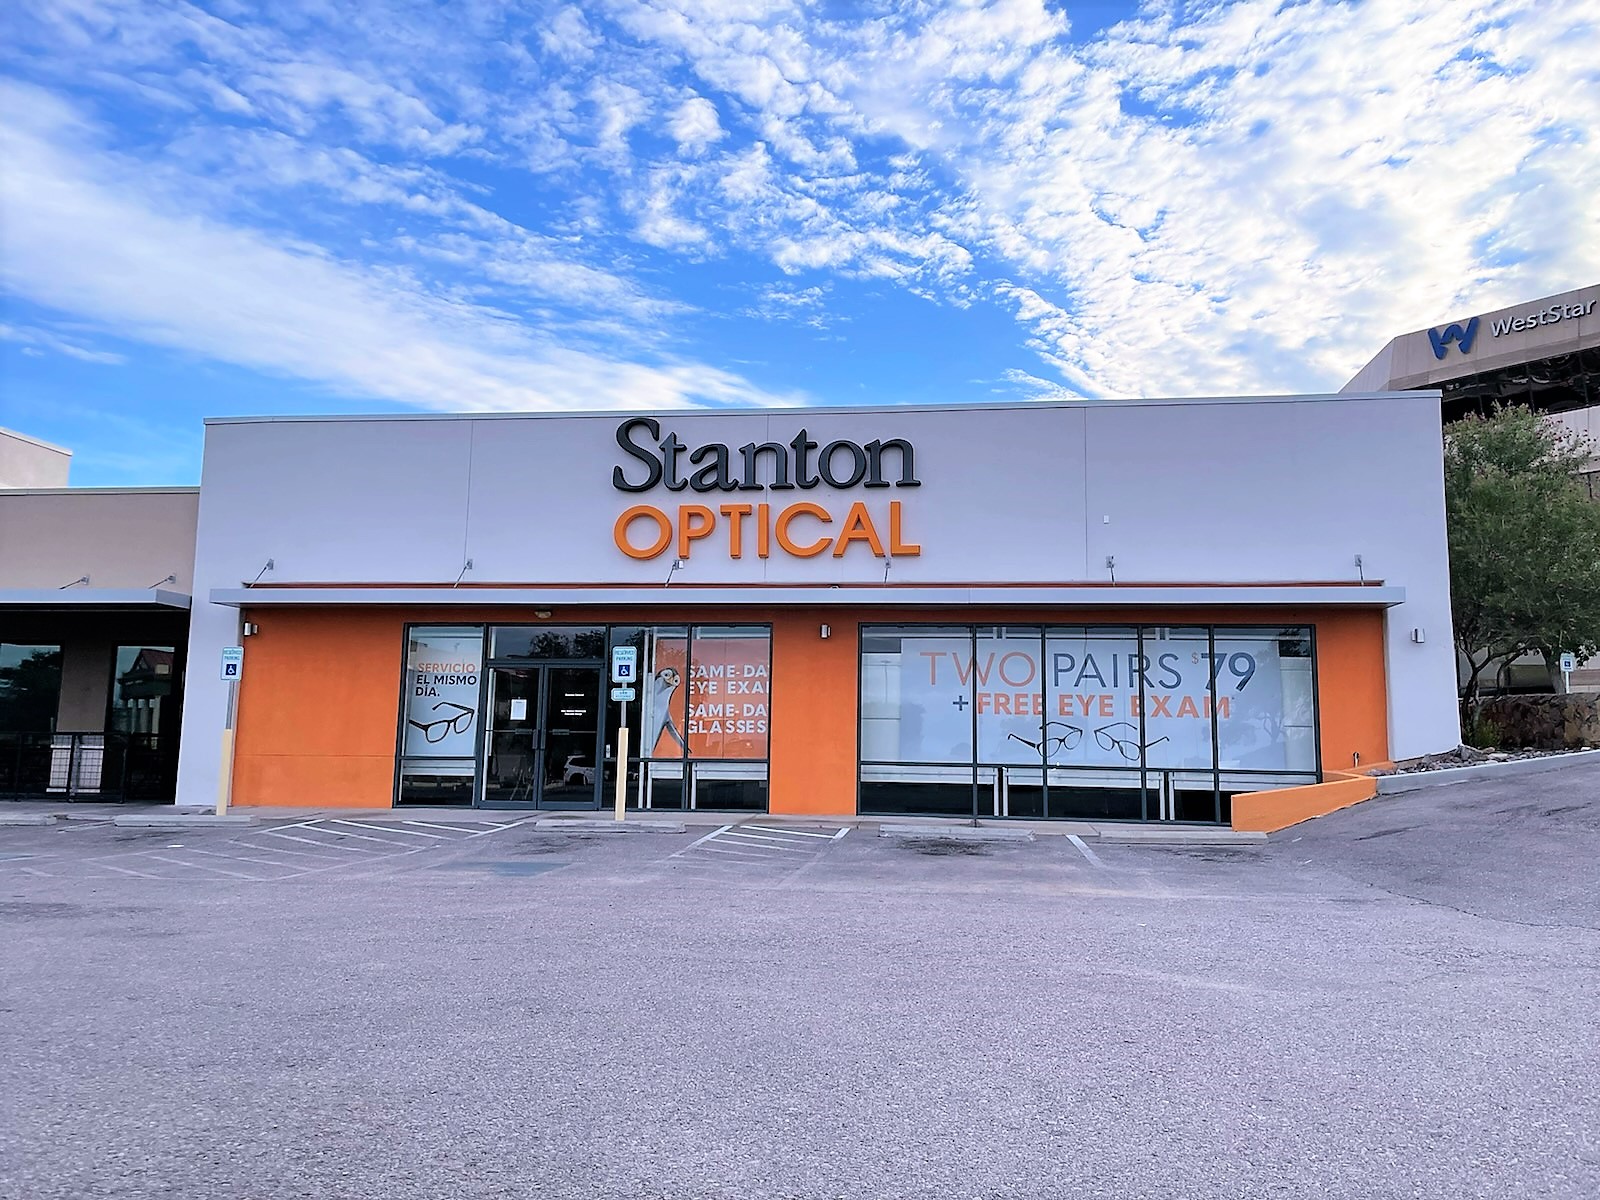 Storefront at Stanton Optical store in Las Cruces, NM 88011 Stanton Optical Las Cruces (575)249-2207